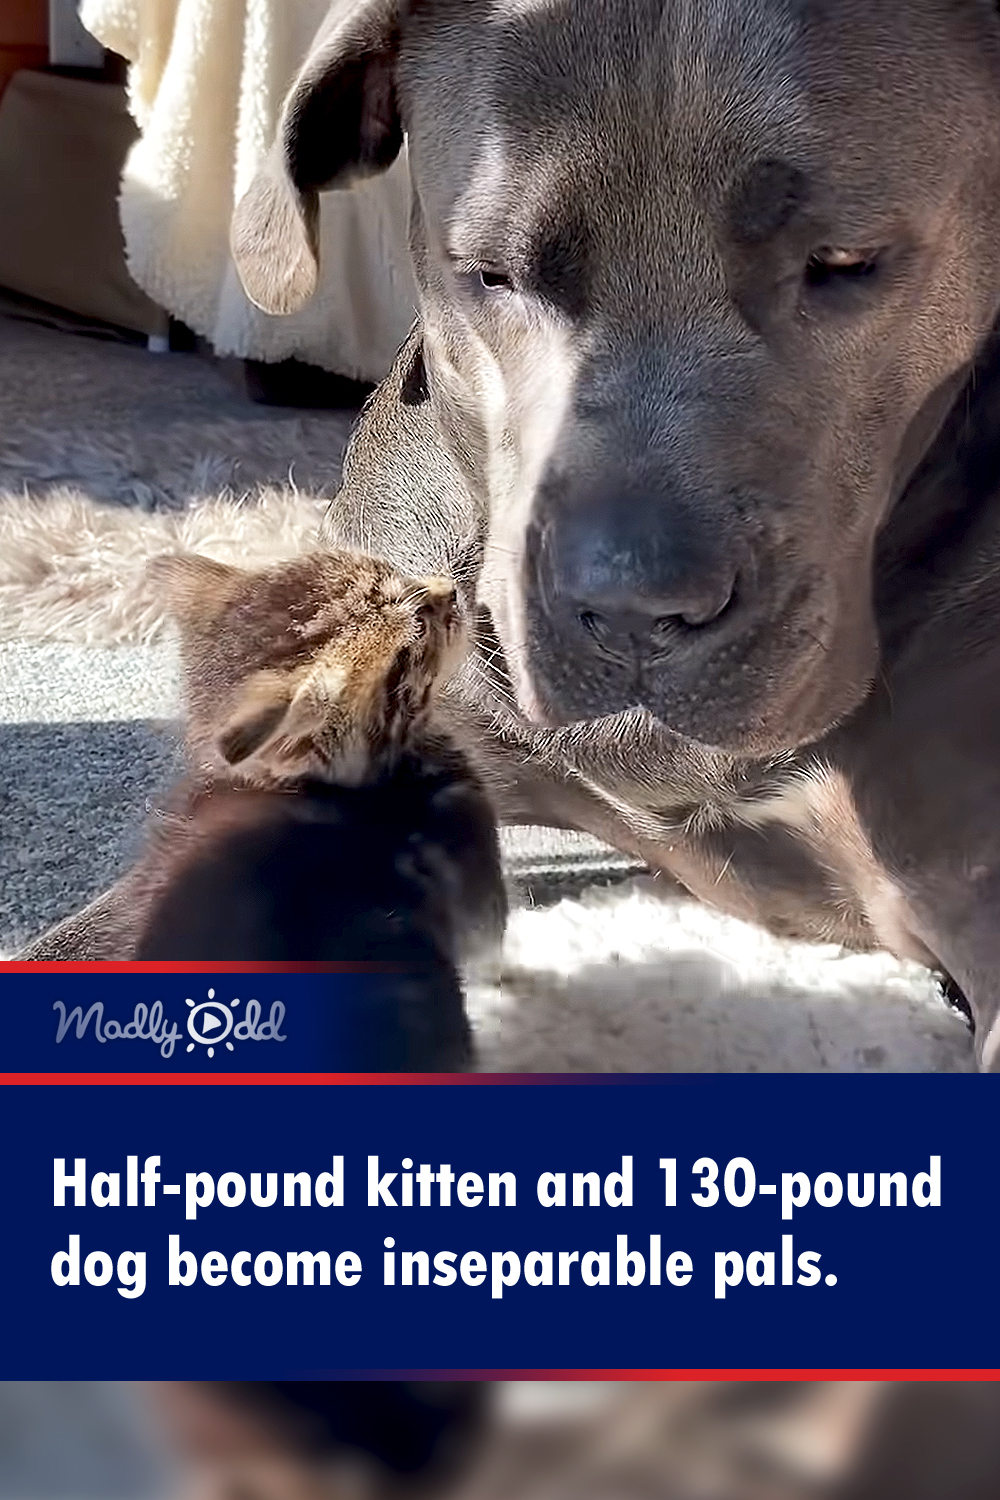 Half-pound kitten and 130-pound dog become inseparable pals